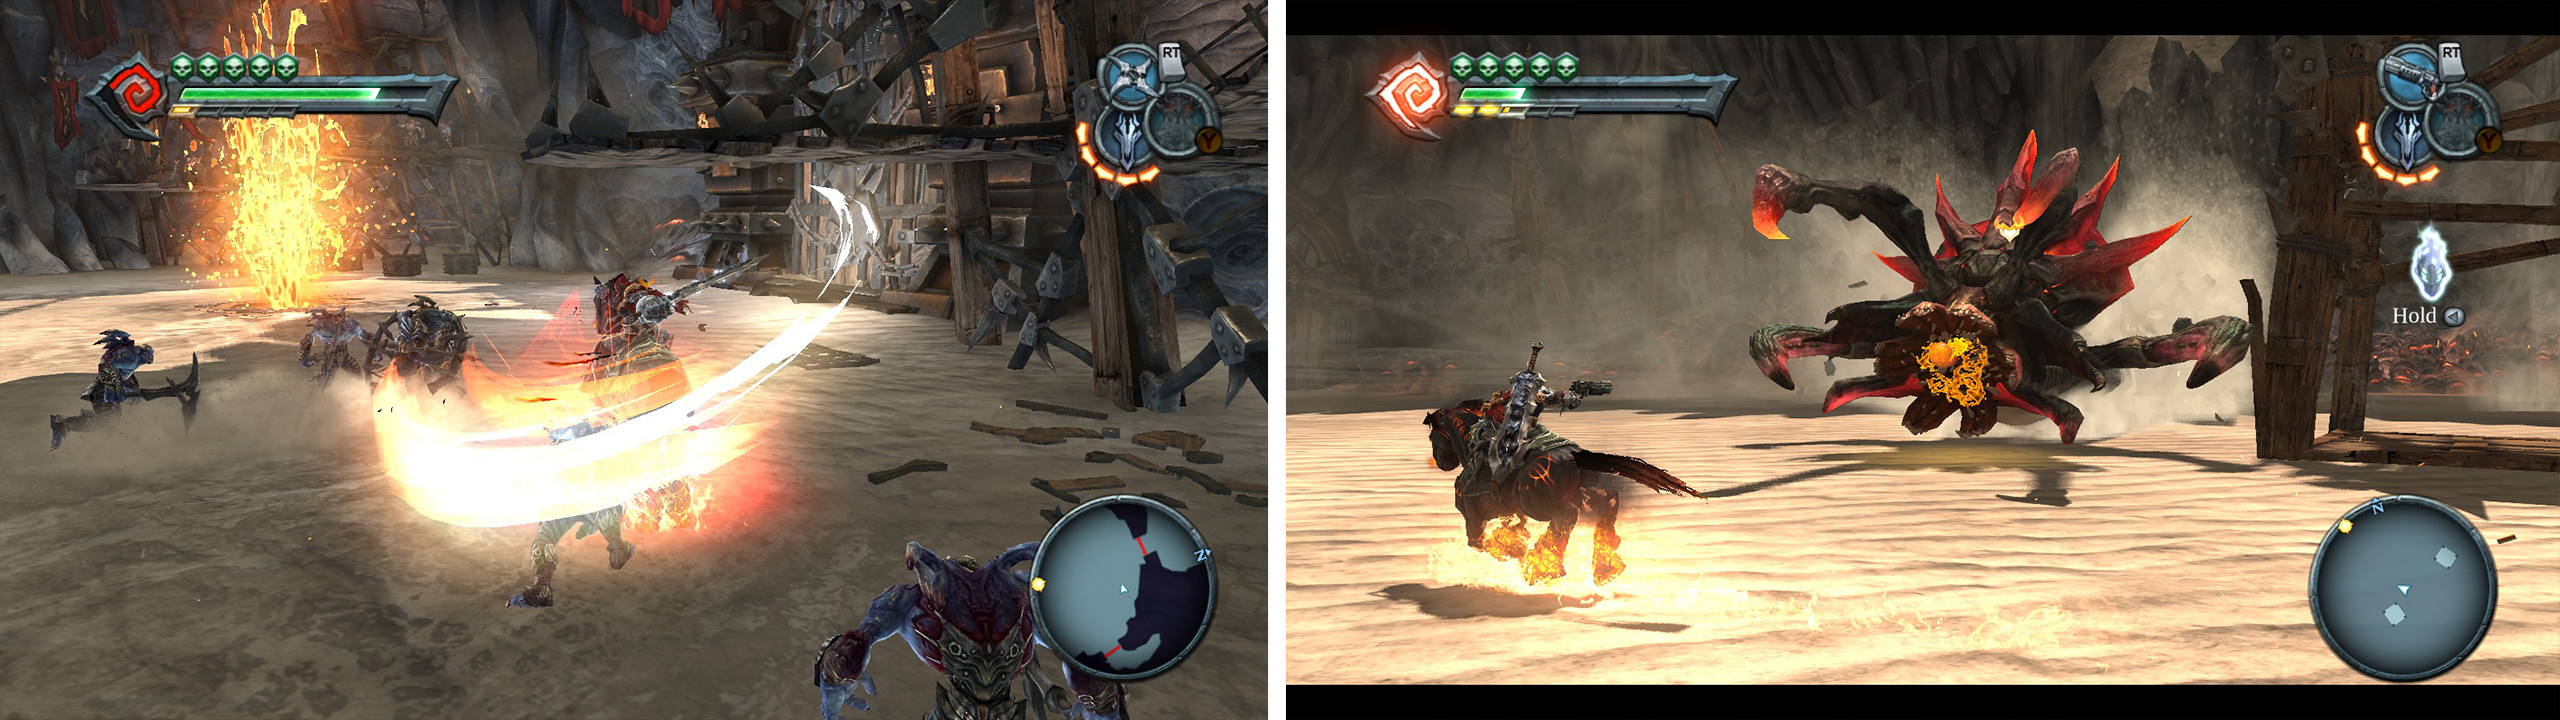 Kill the remaining enemies in the arena from horseback (left). Return to the room with the Ash Worm and take it down by shooting it in the mouth (right).